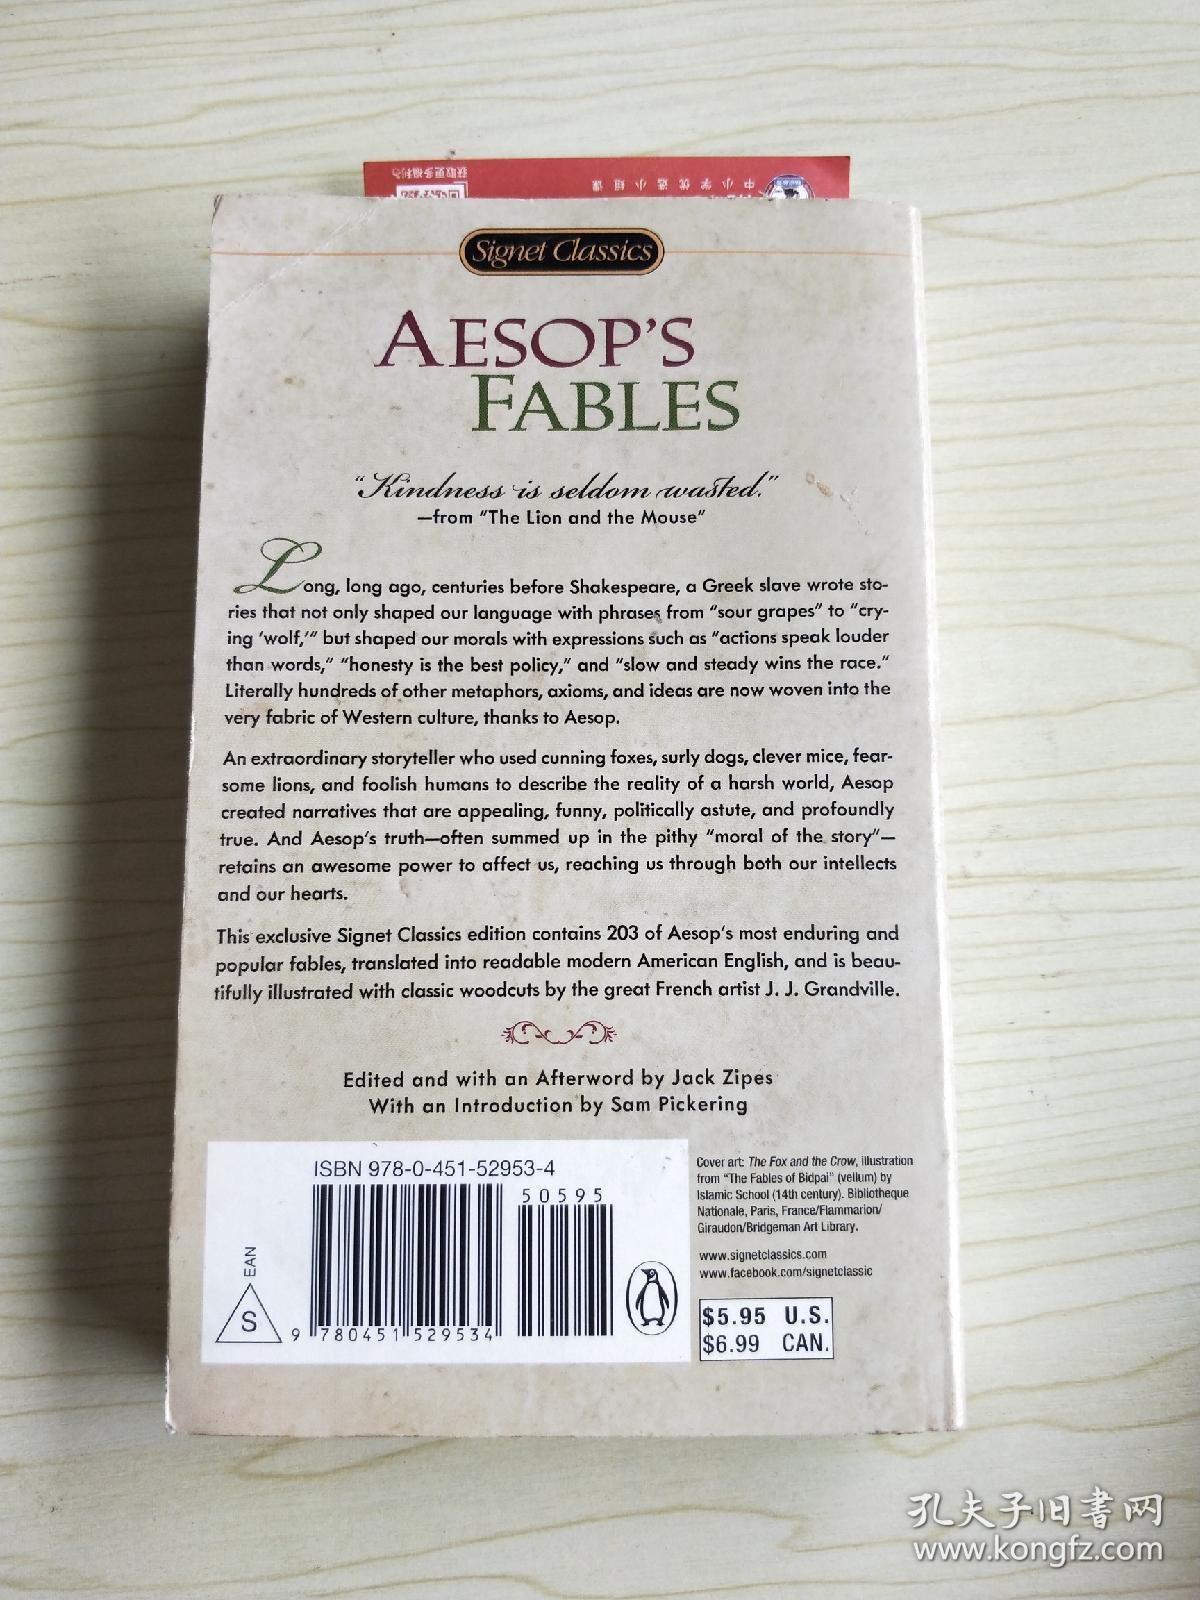 aesop"s fables[伊索寓言]